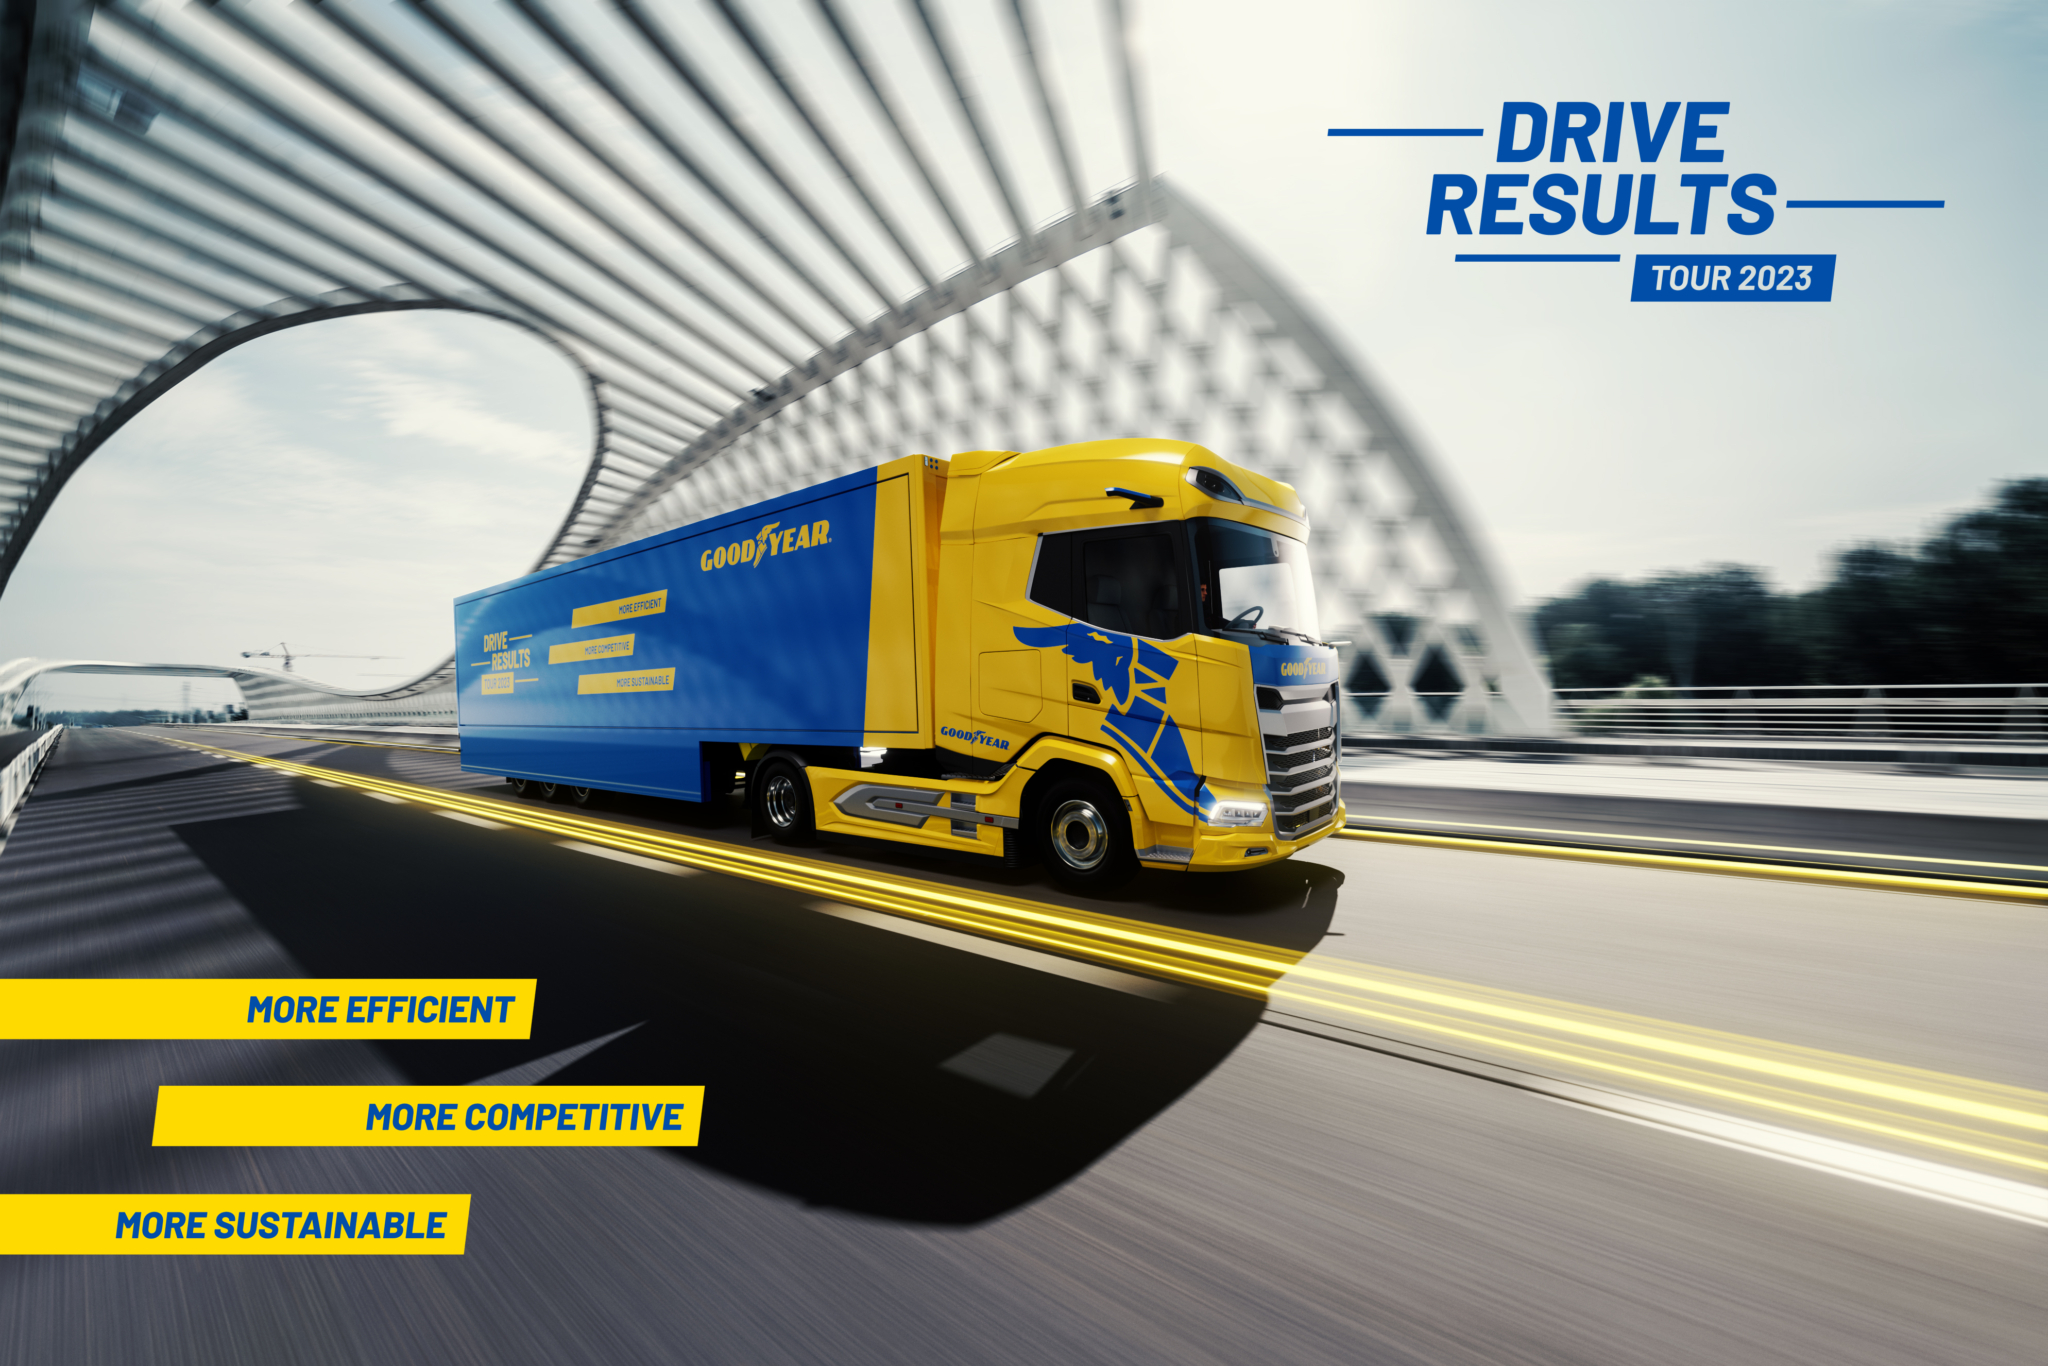 UK fleets ‘lead way’ in sustainability investment – Goodyear